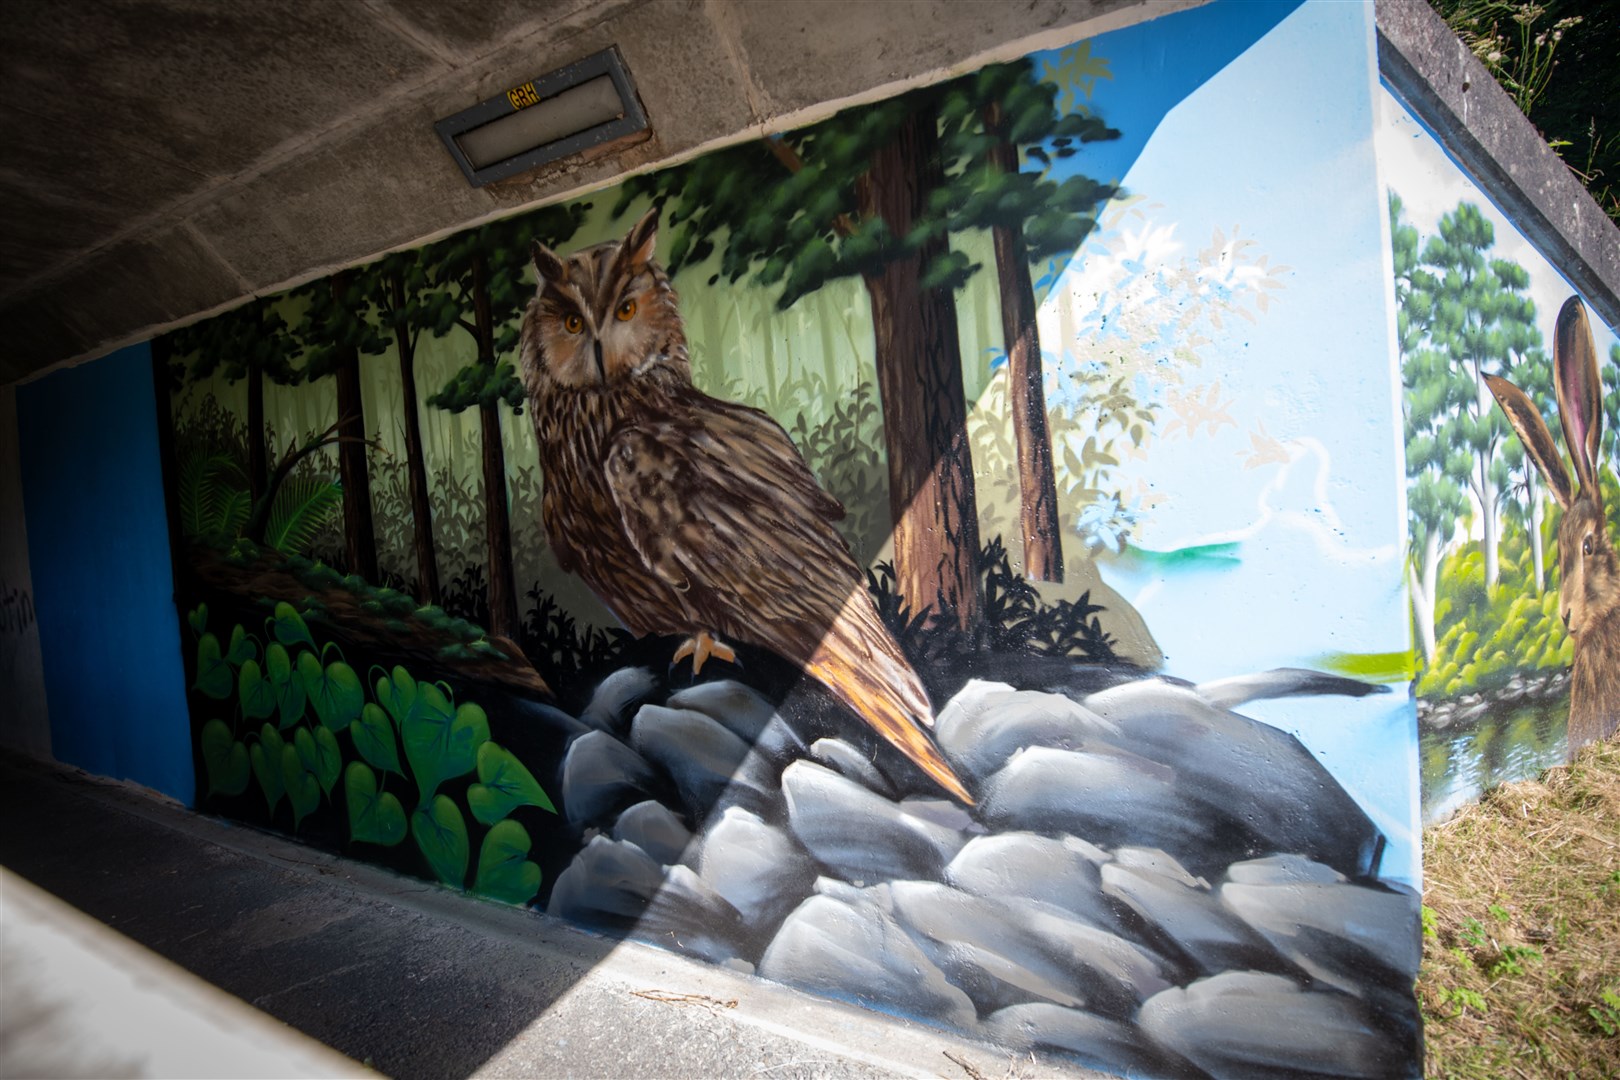 An owl keeps watch within the underpass.